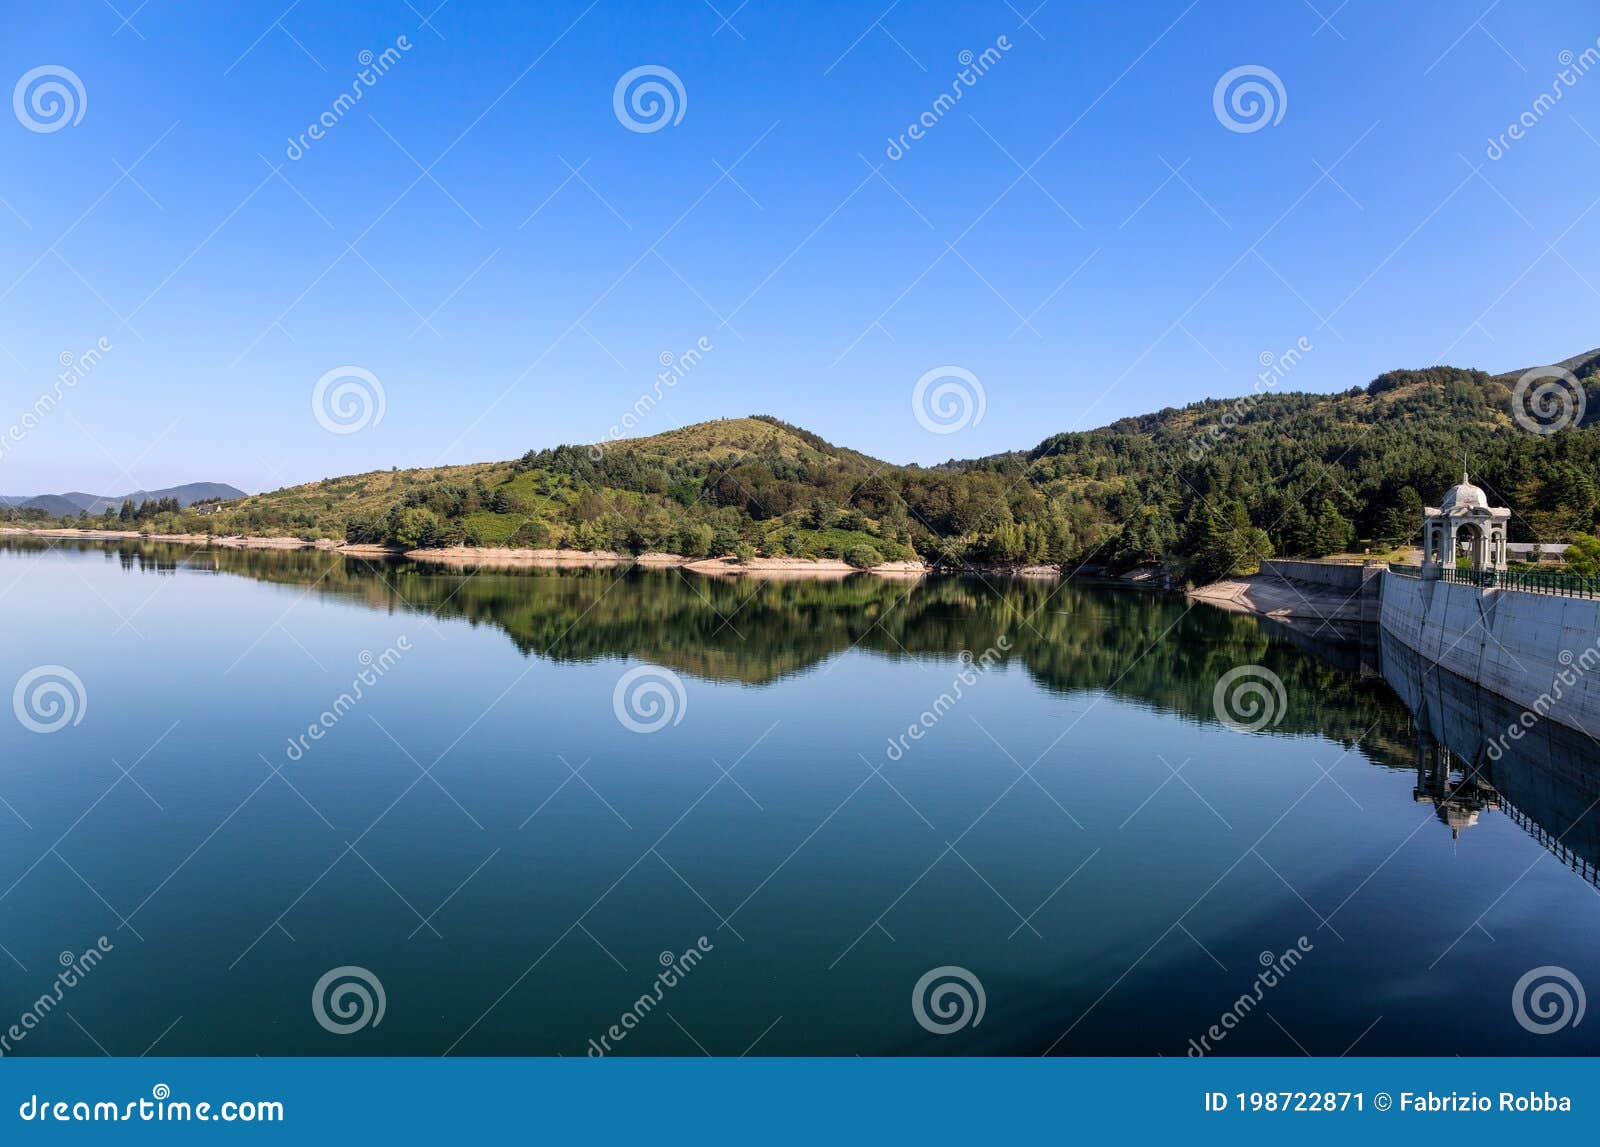 giacopiane lake is an artificial reservoir located in the sturla valley in the municipality of borzonasca, inland of chiavari,